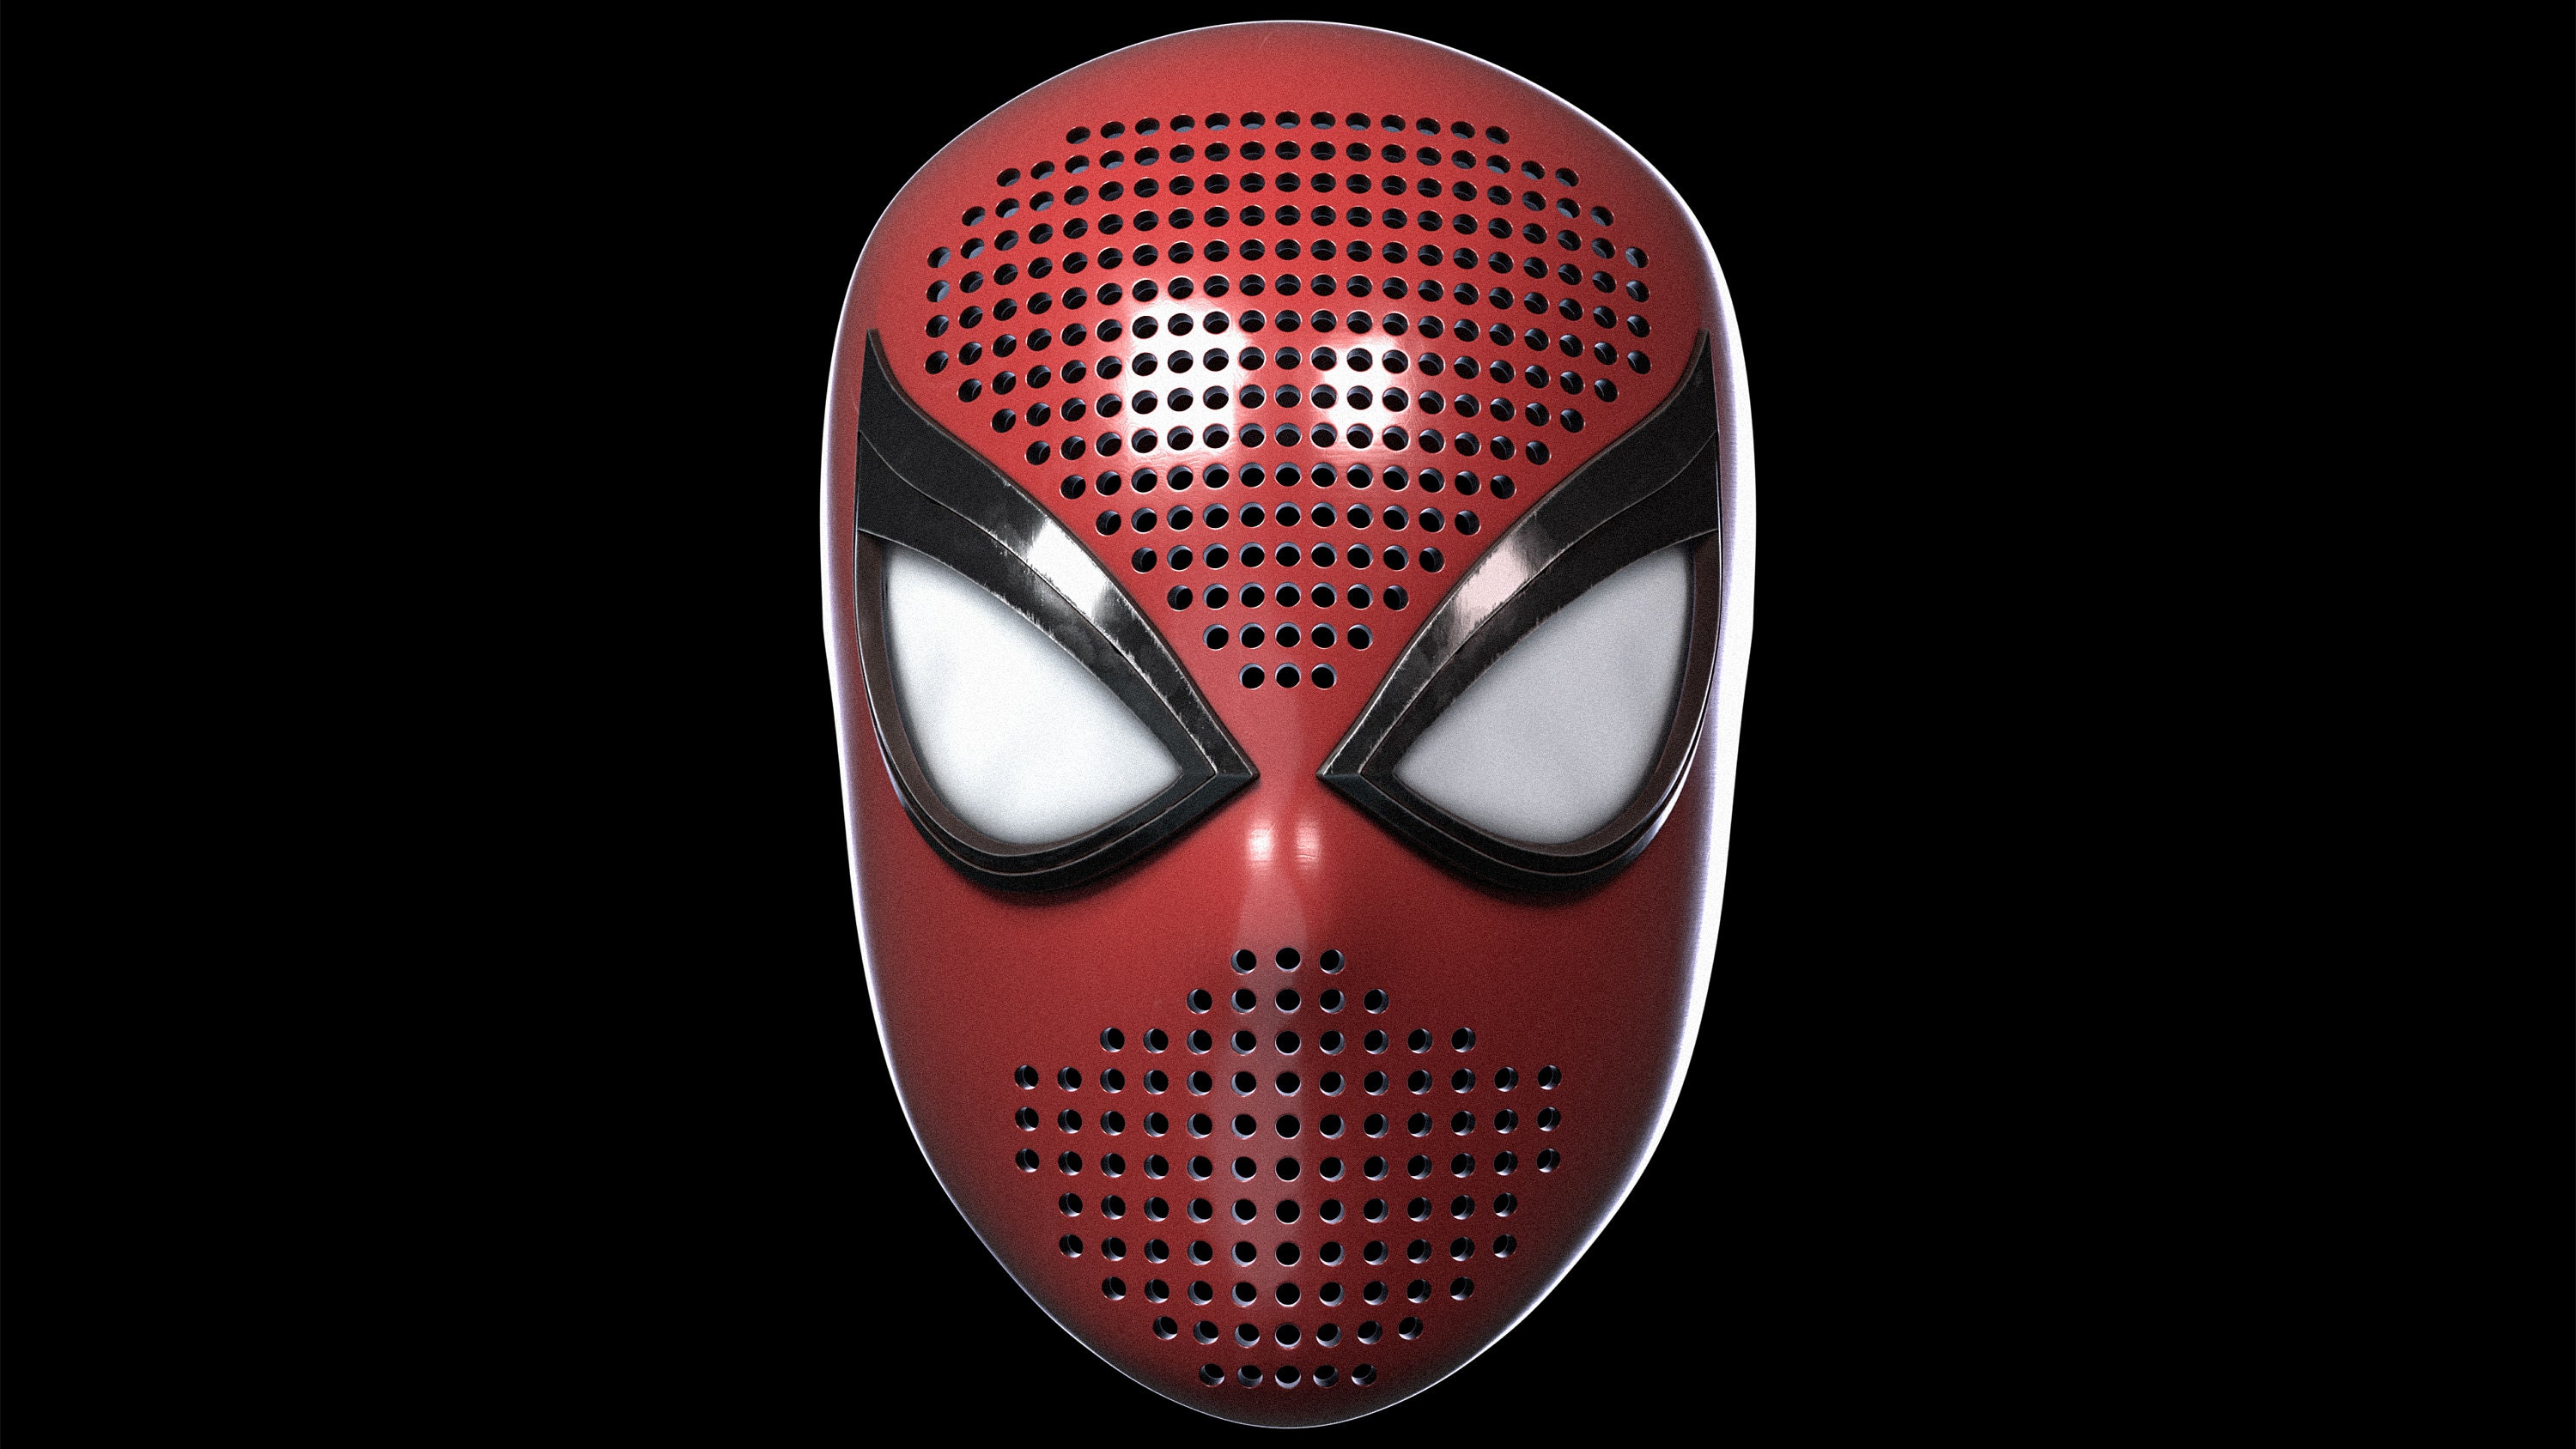 PUFF PAINT spider-man ps4 Advanced suit update. Getting a new mask tha